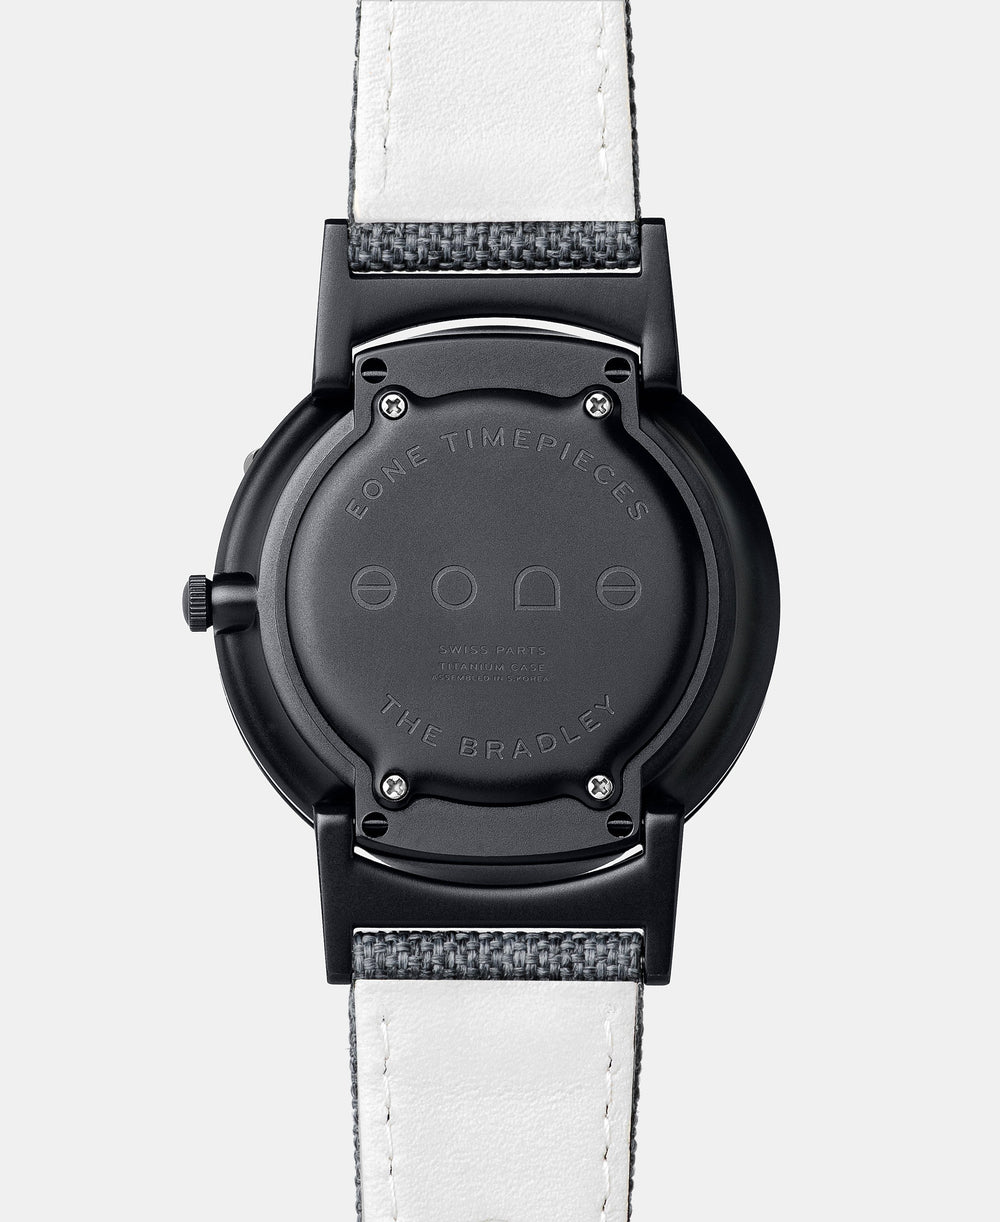 A photo of the back of the watch, showing the back plate engraved with the Eone logo.